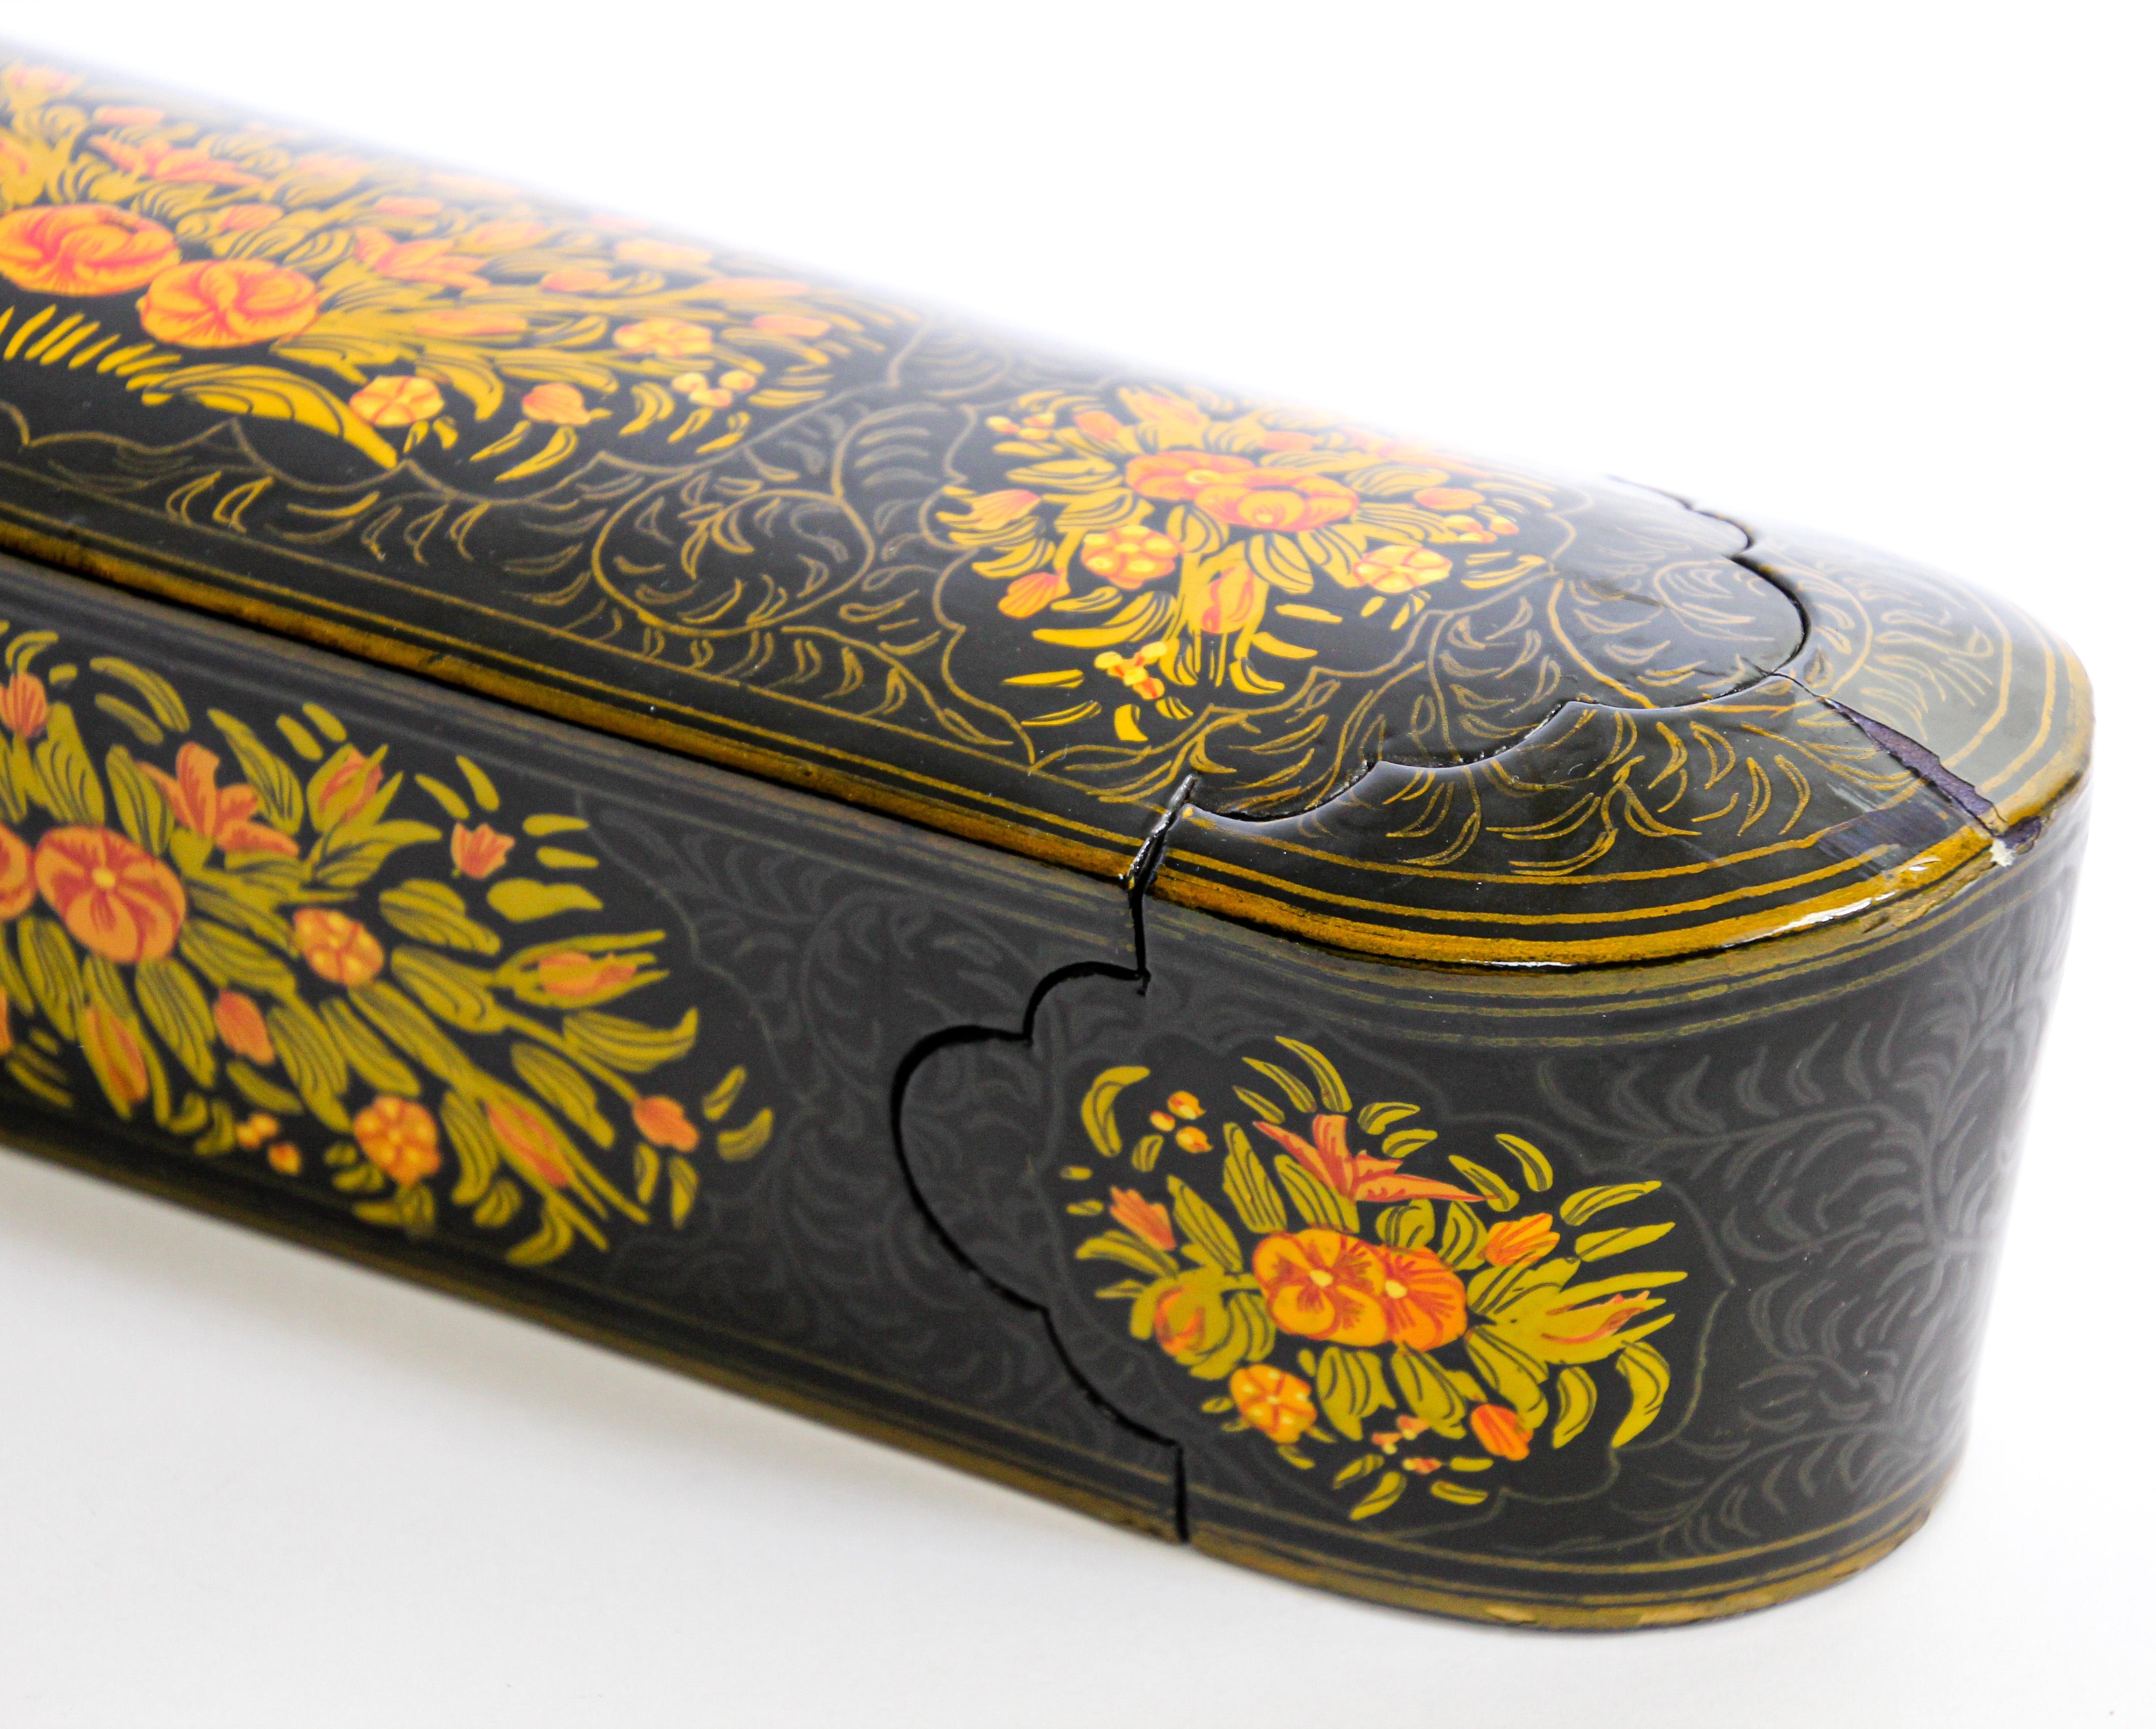 Moorish Indo Persian Lacquer Pen Box Hand Painted with Floral Design